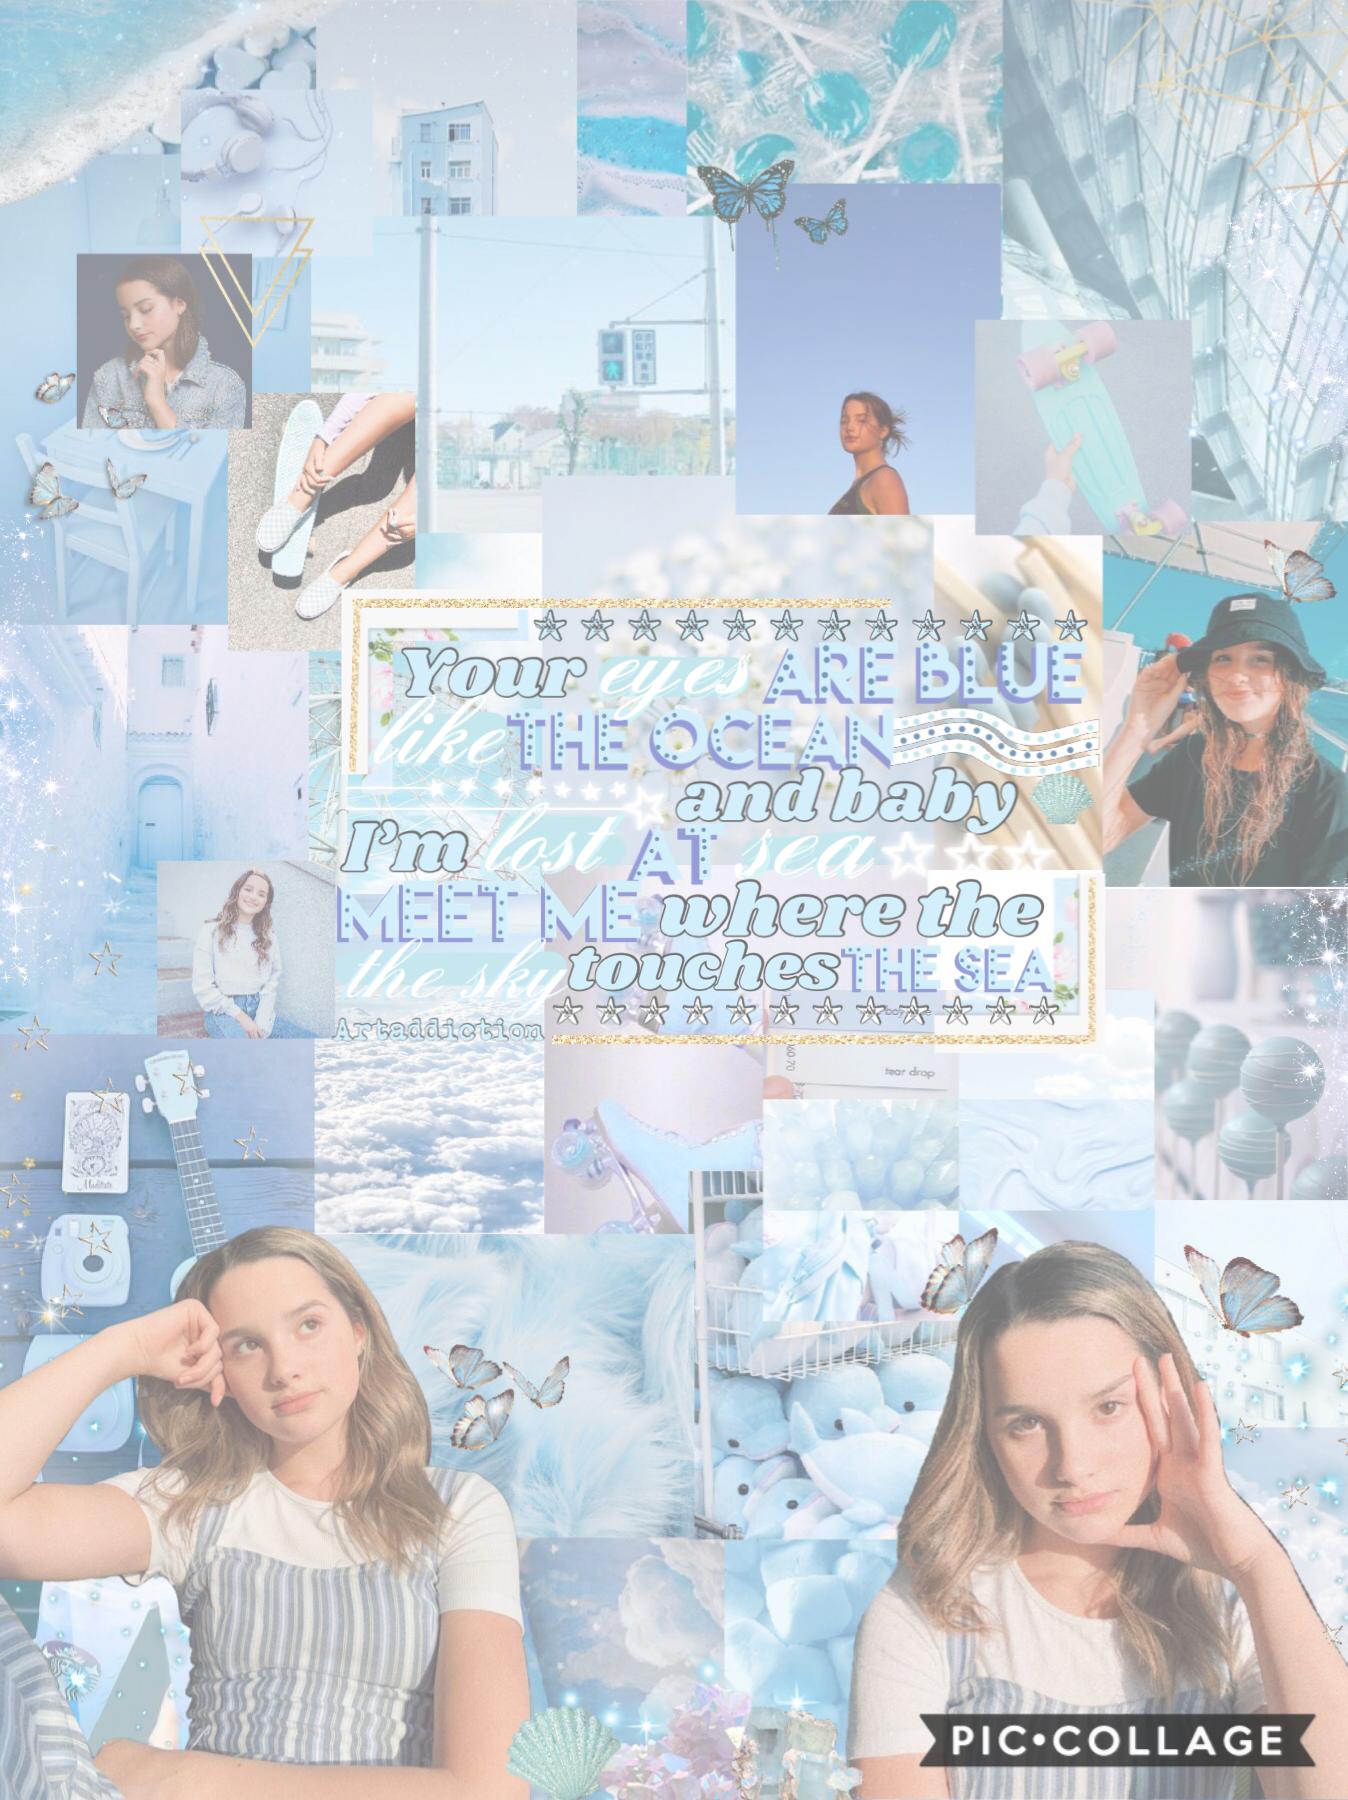 Here’s my entry to Mary11am’s collage contest,Make sure to check out her awesome collages 🦋💙💙